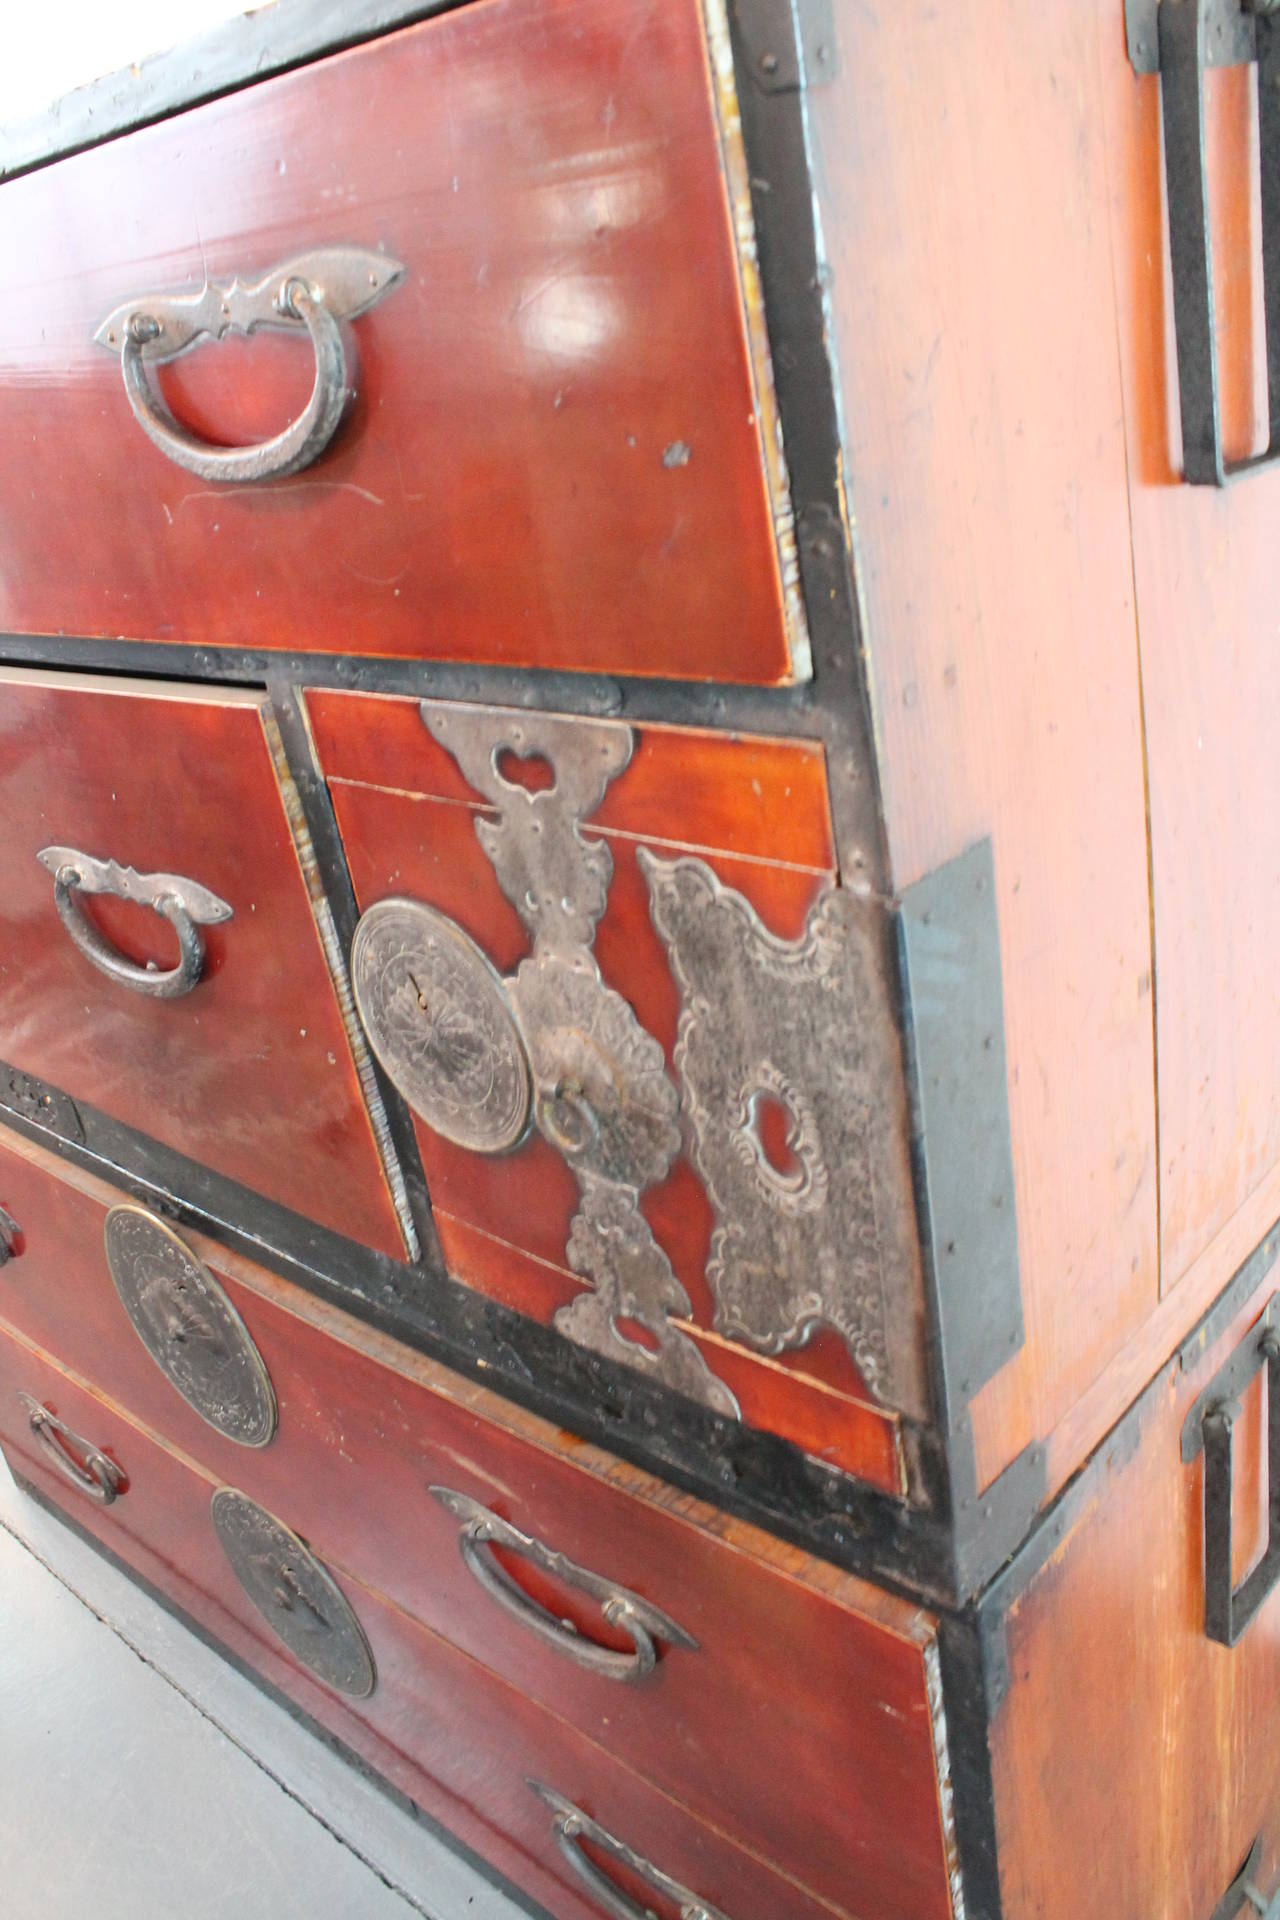 An exceptional Japanese two sectional clothing chest (isho kasane dansu) from the Sendai region, north of Tokyo. The sugi (cryptomeria) tansu with rich translucent red lacquer finish features two pieces that stack onto one another.
Could be divided